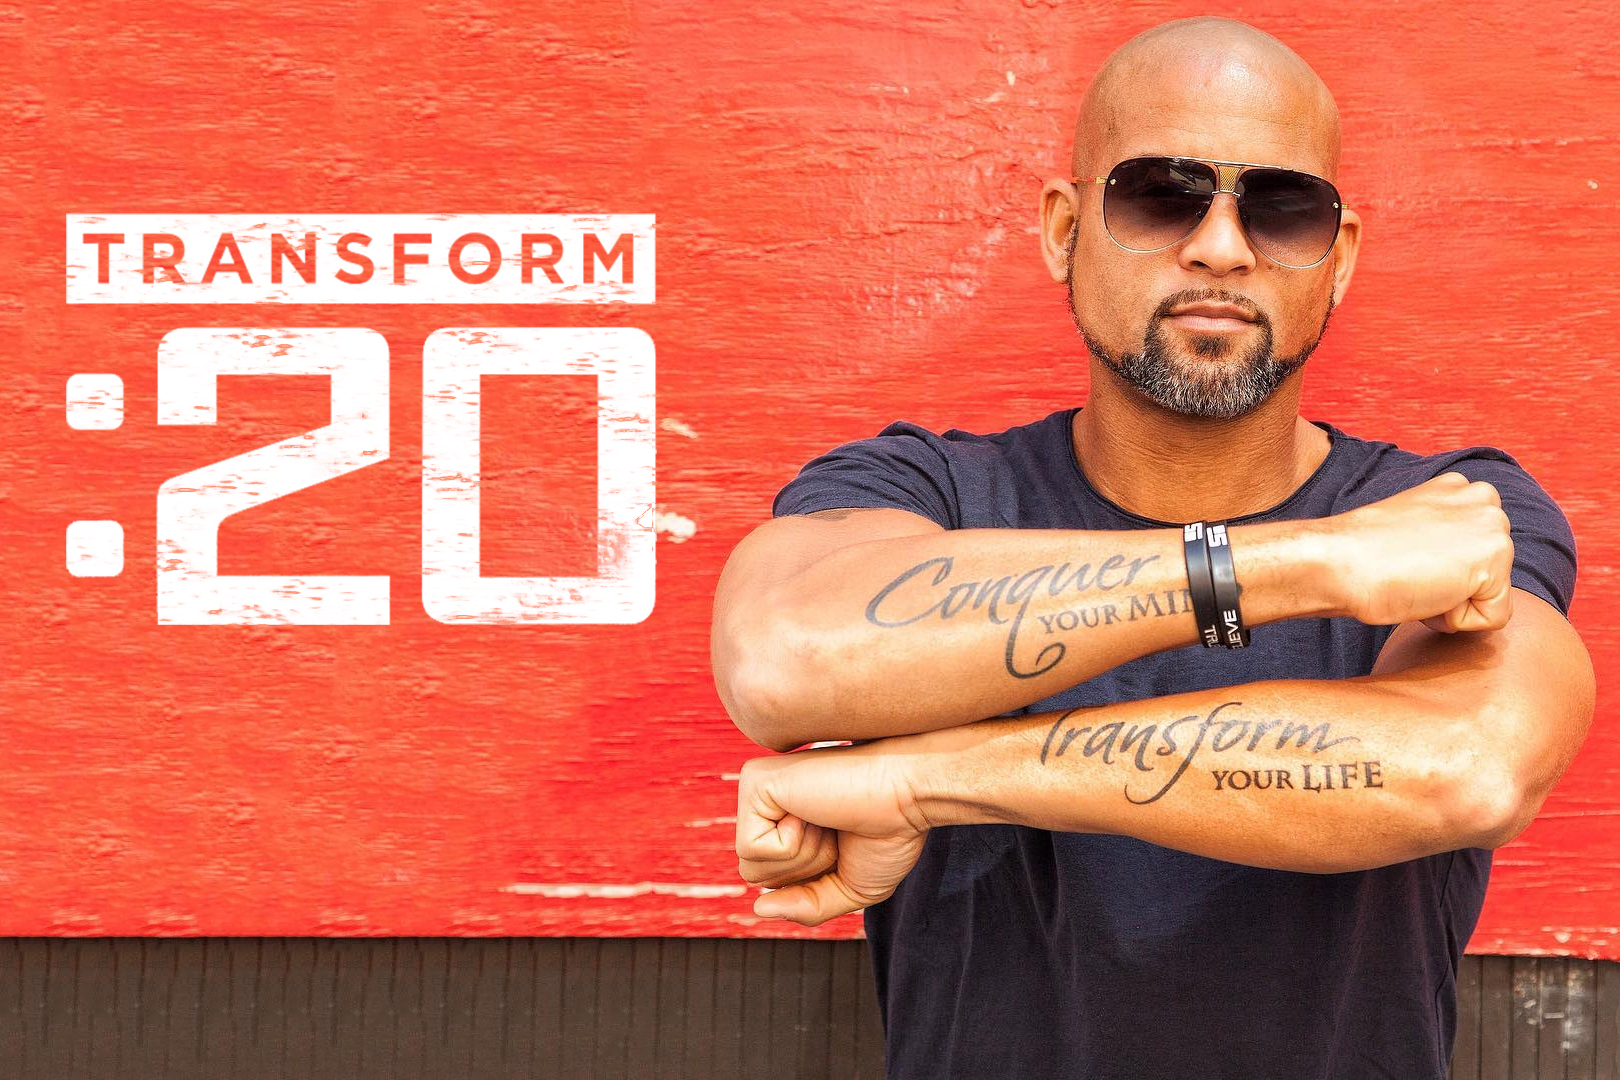 Transform :20 New Beachbody Workout with Shaun T Coming 2019